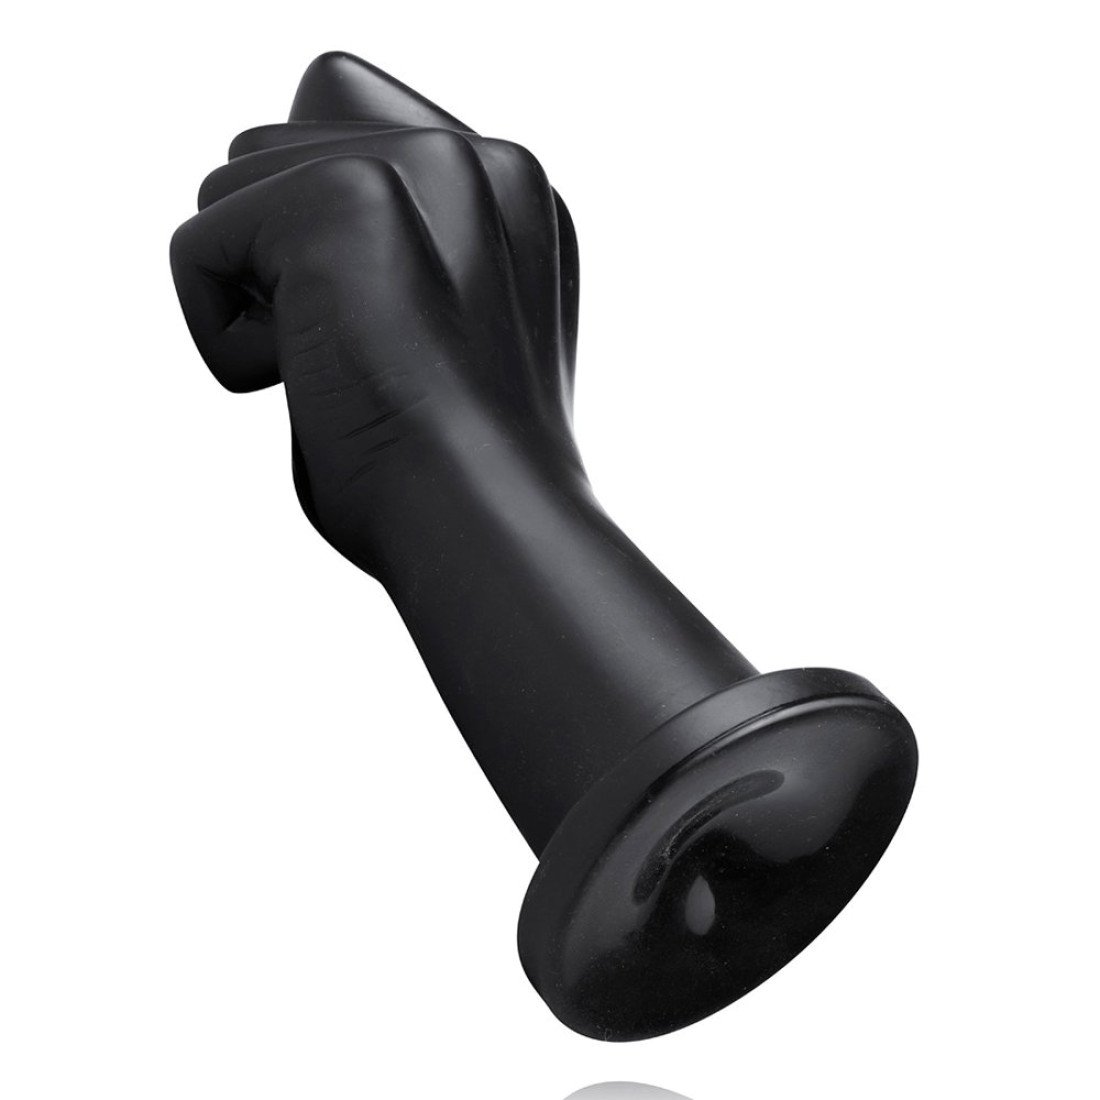 XXL analinis dildo „General Elite Force Fist Corps“ - Buttr